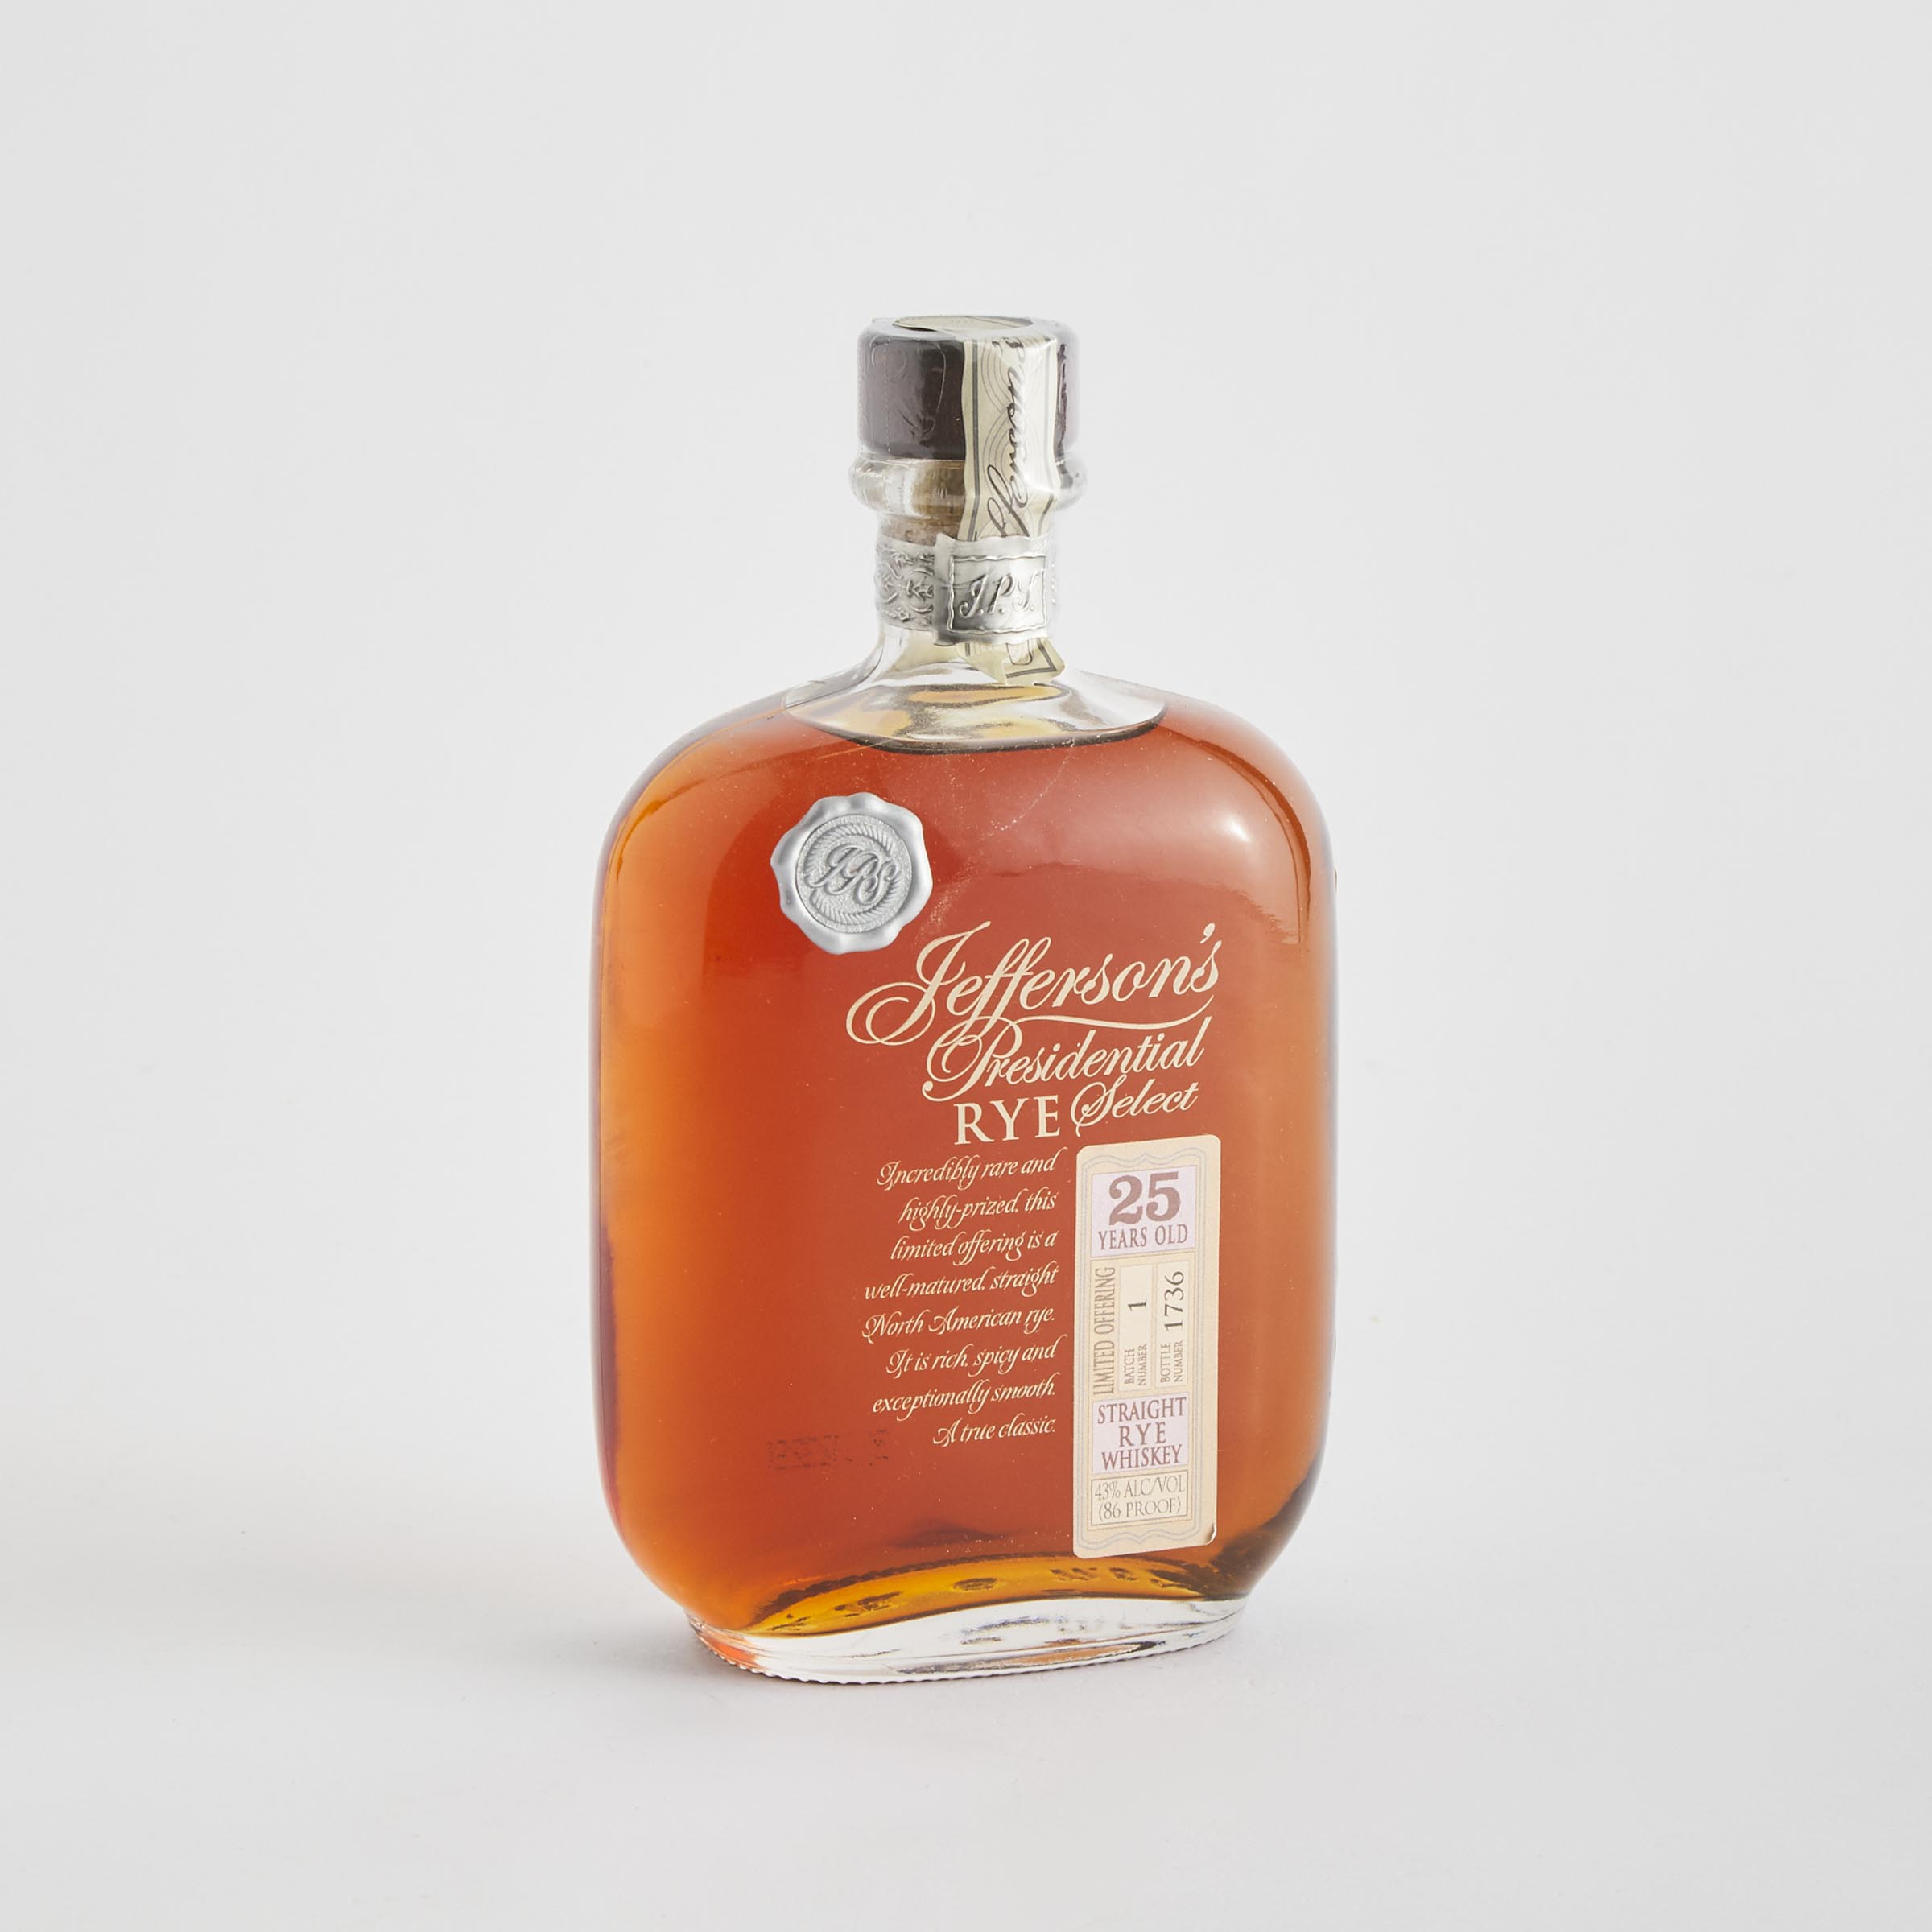 JEFFERSON’S PRESIDENTIAL RYE SELECT 25 YEARS (ONE 750 ML)